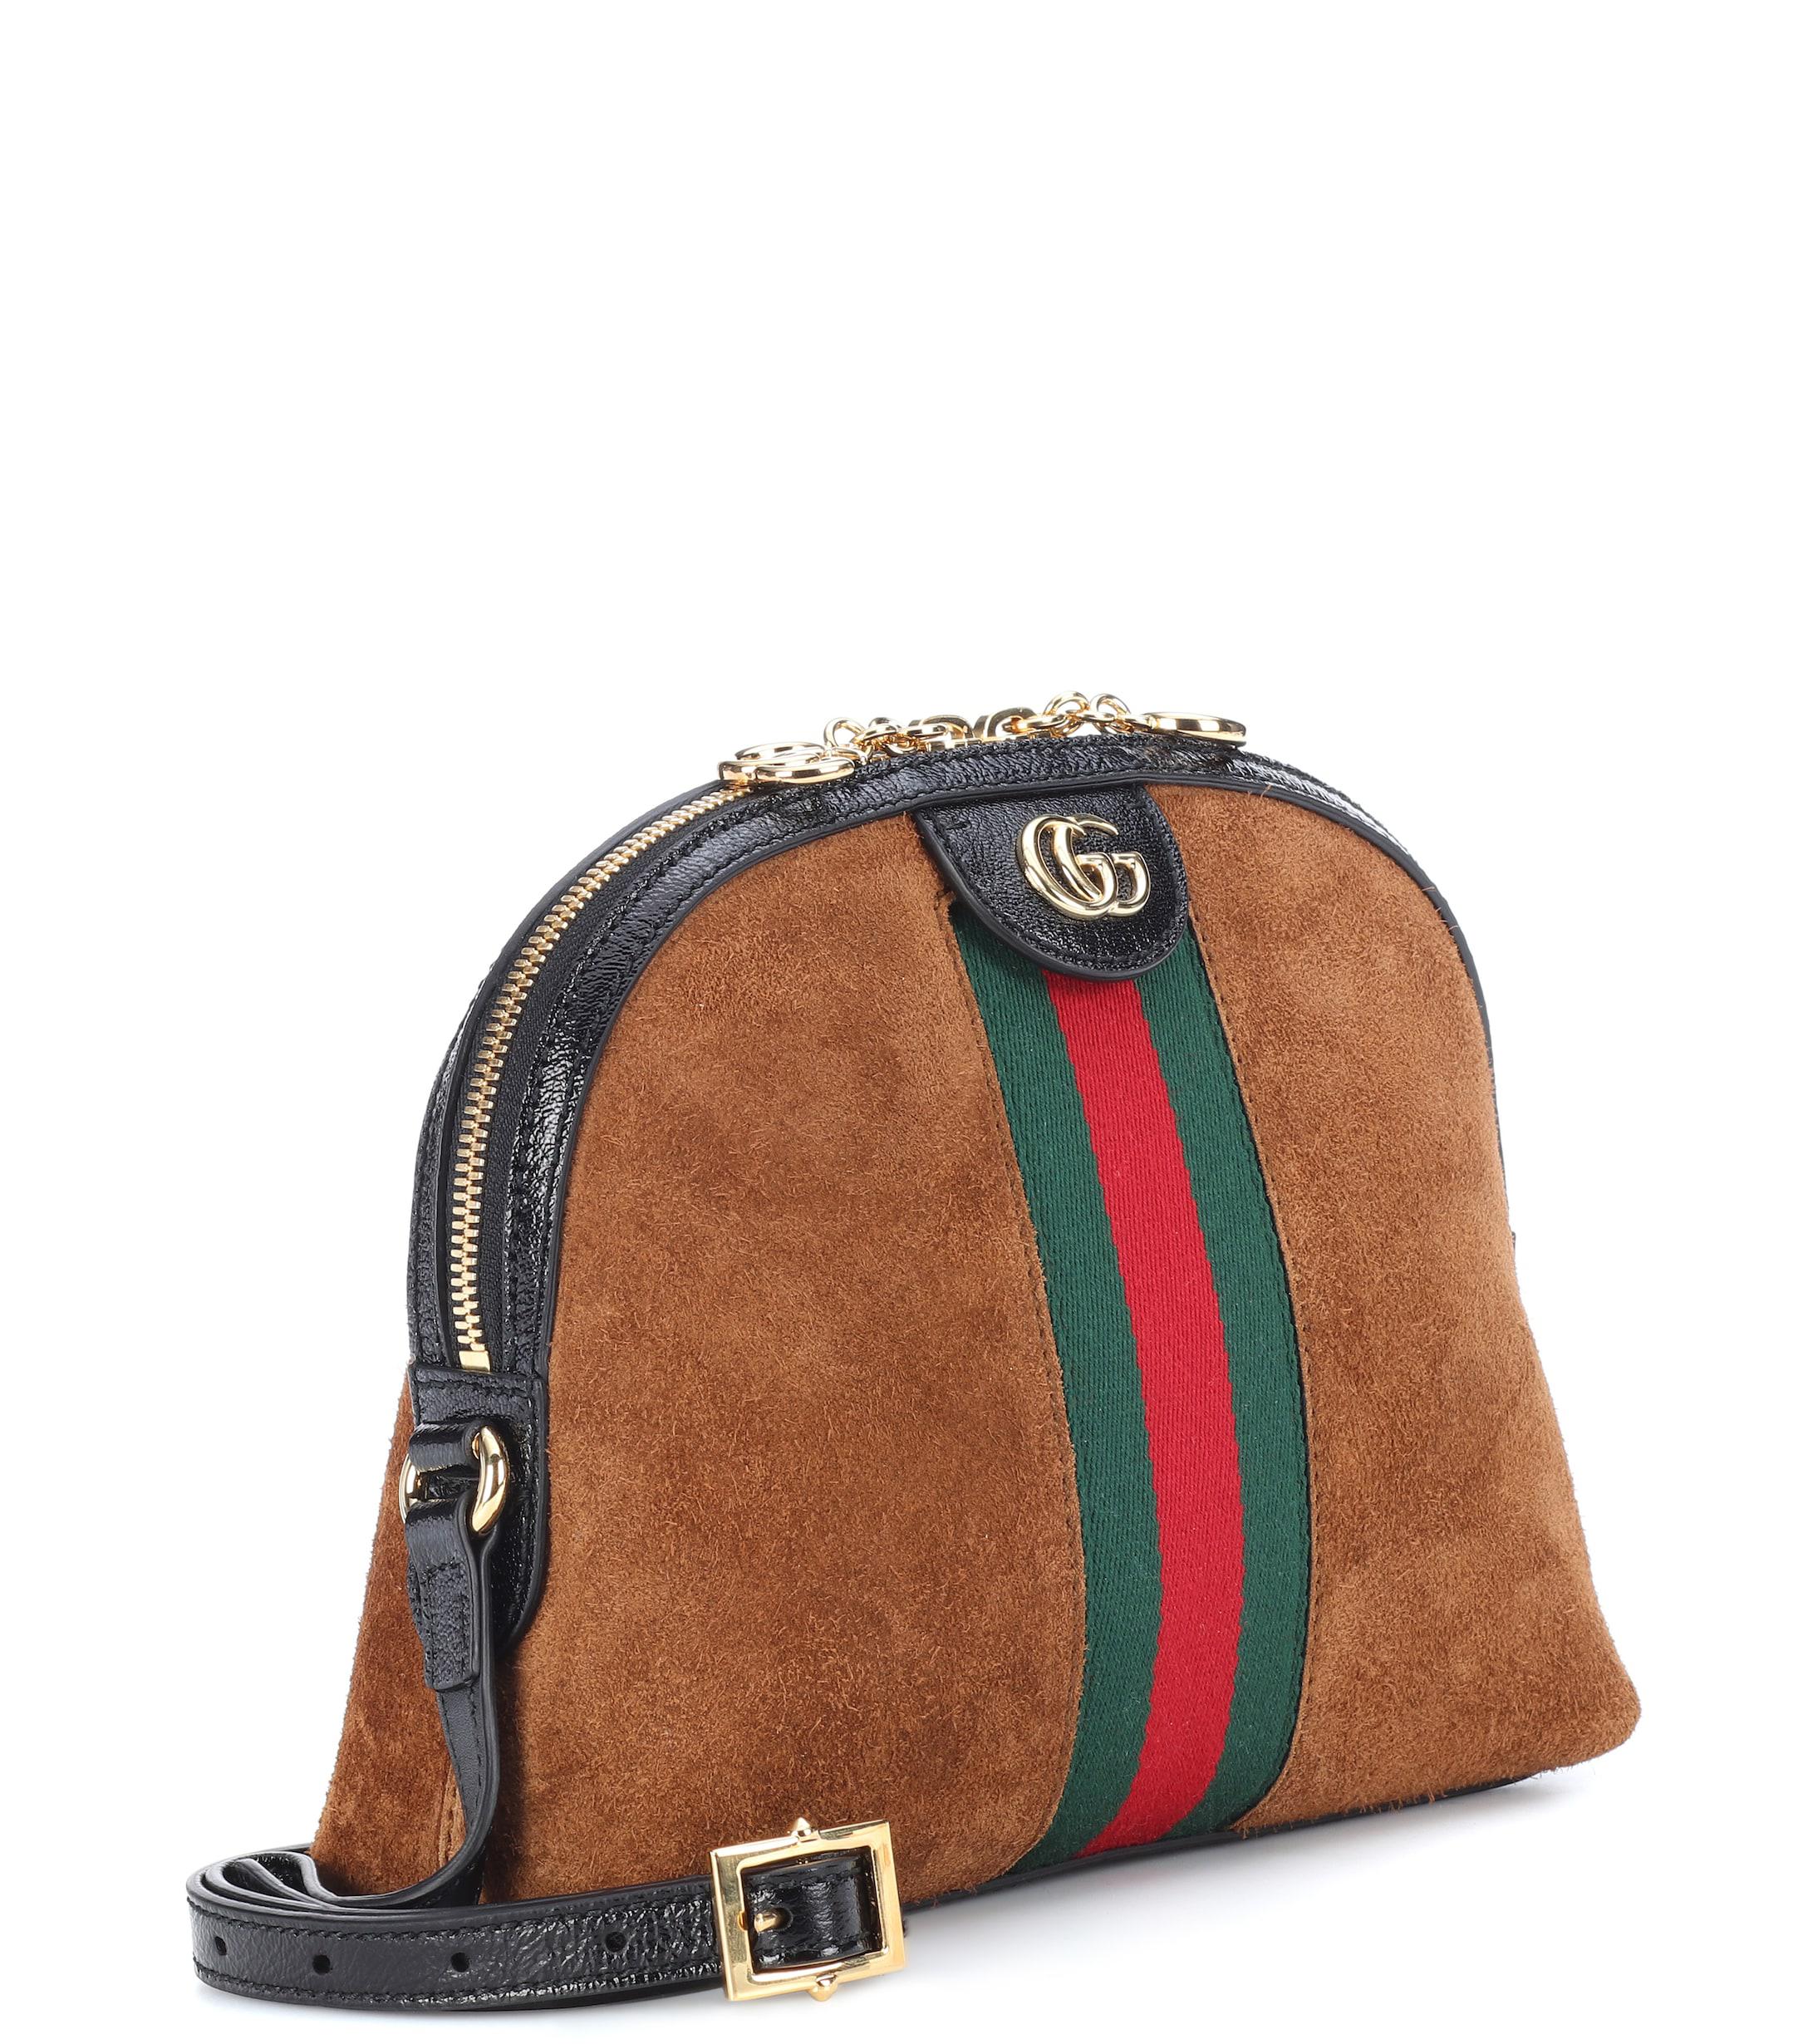 Gucci Ophidia Suede Crossbody Bag in 